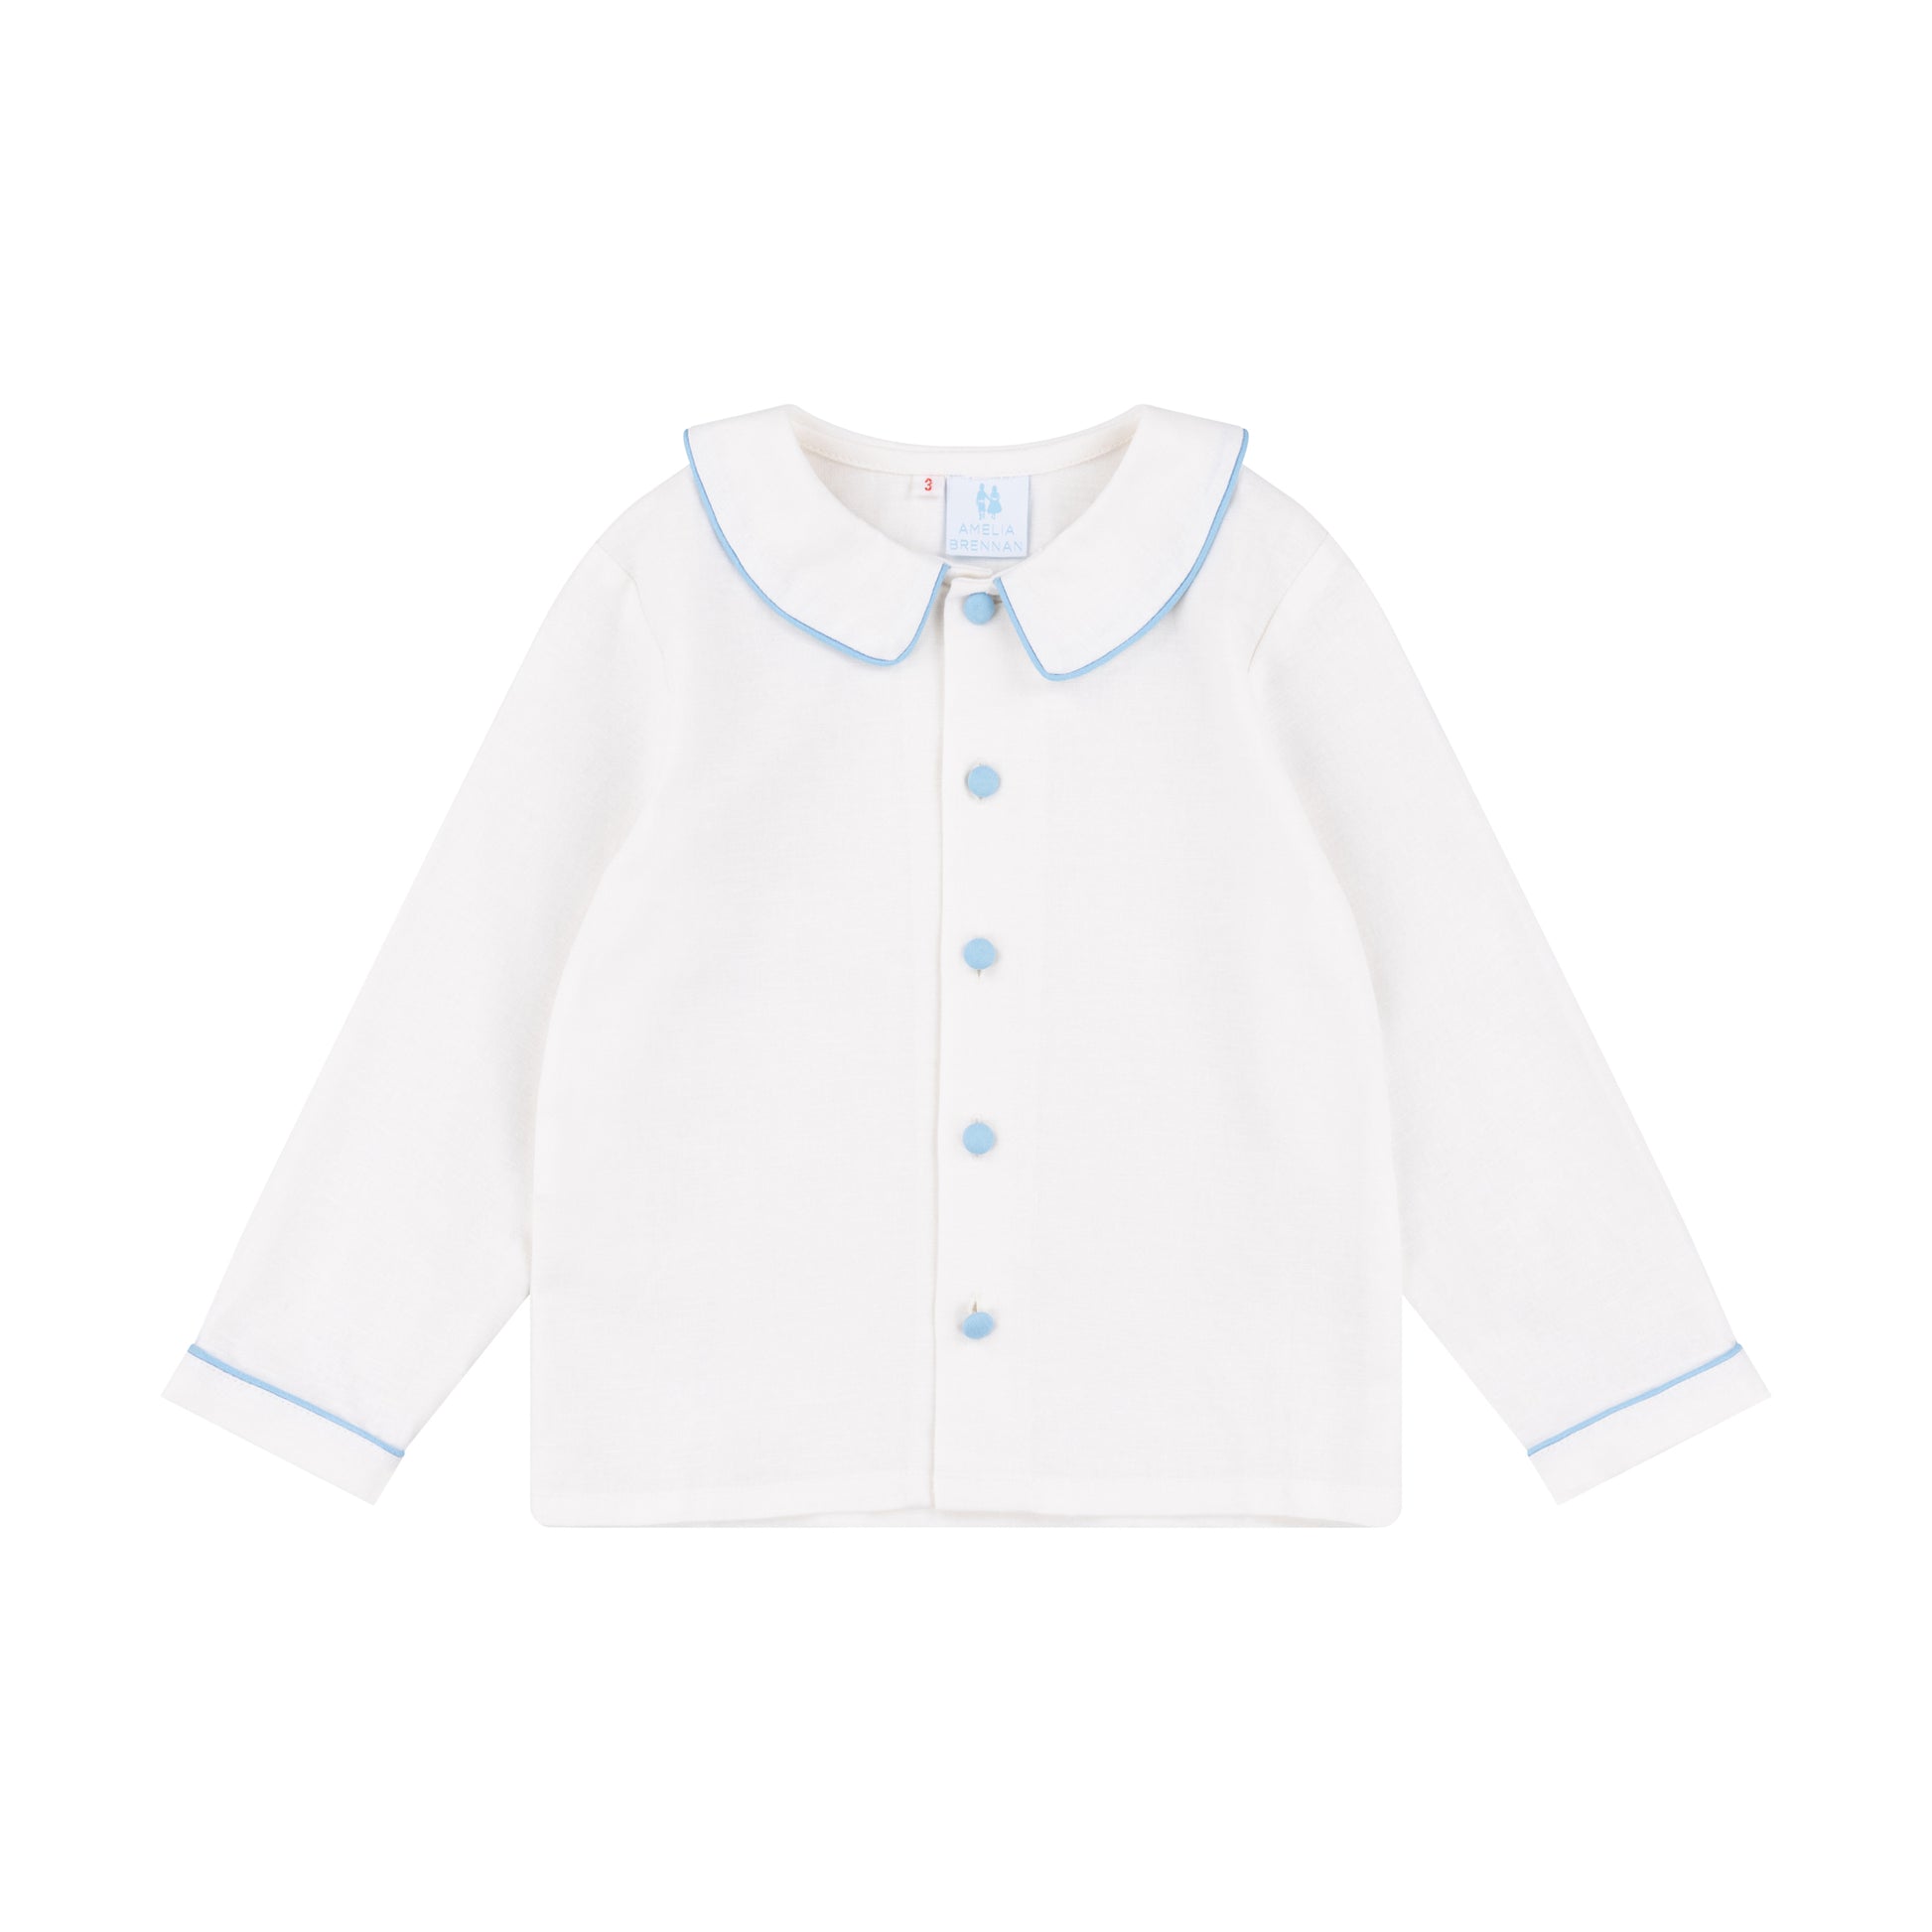 Ivory linen Pageboy shirt with Blue trim and buttons